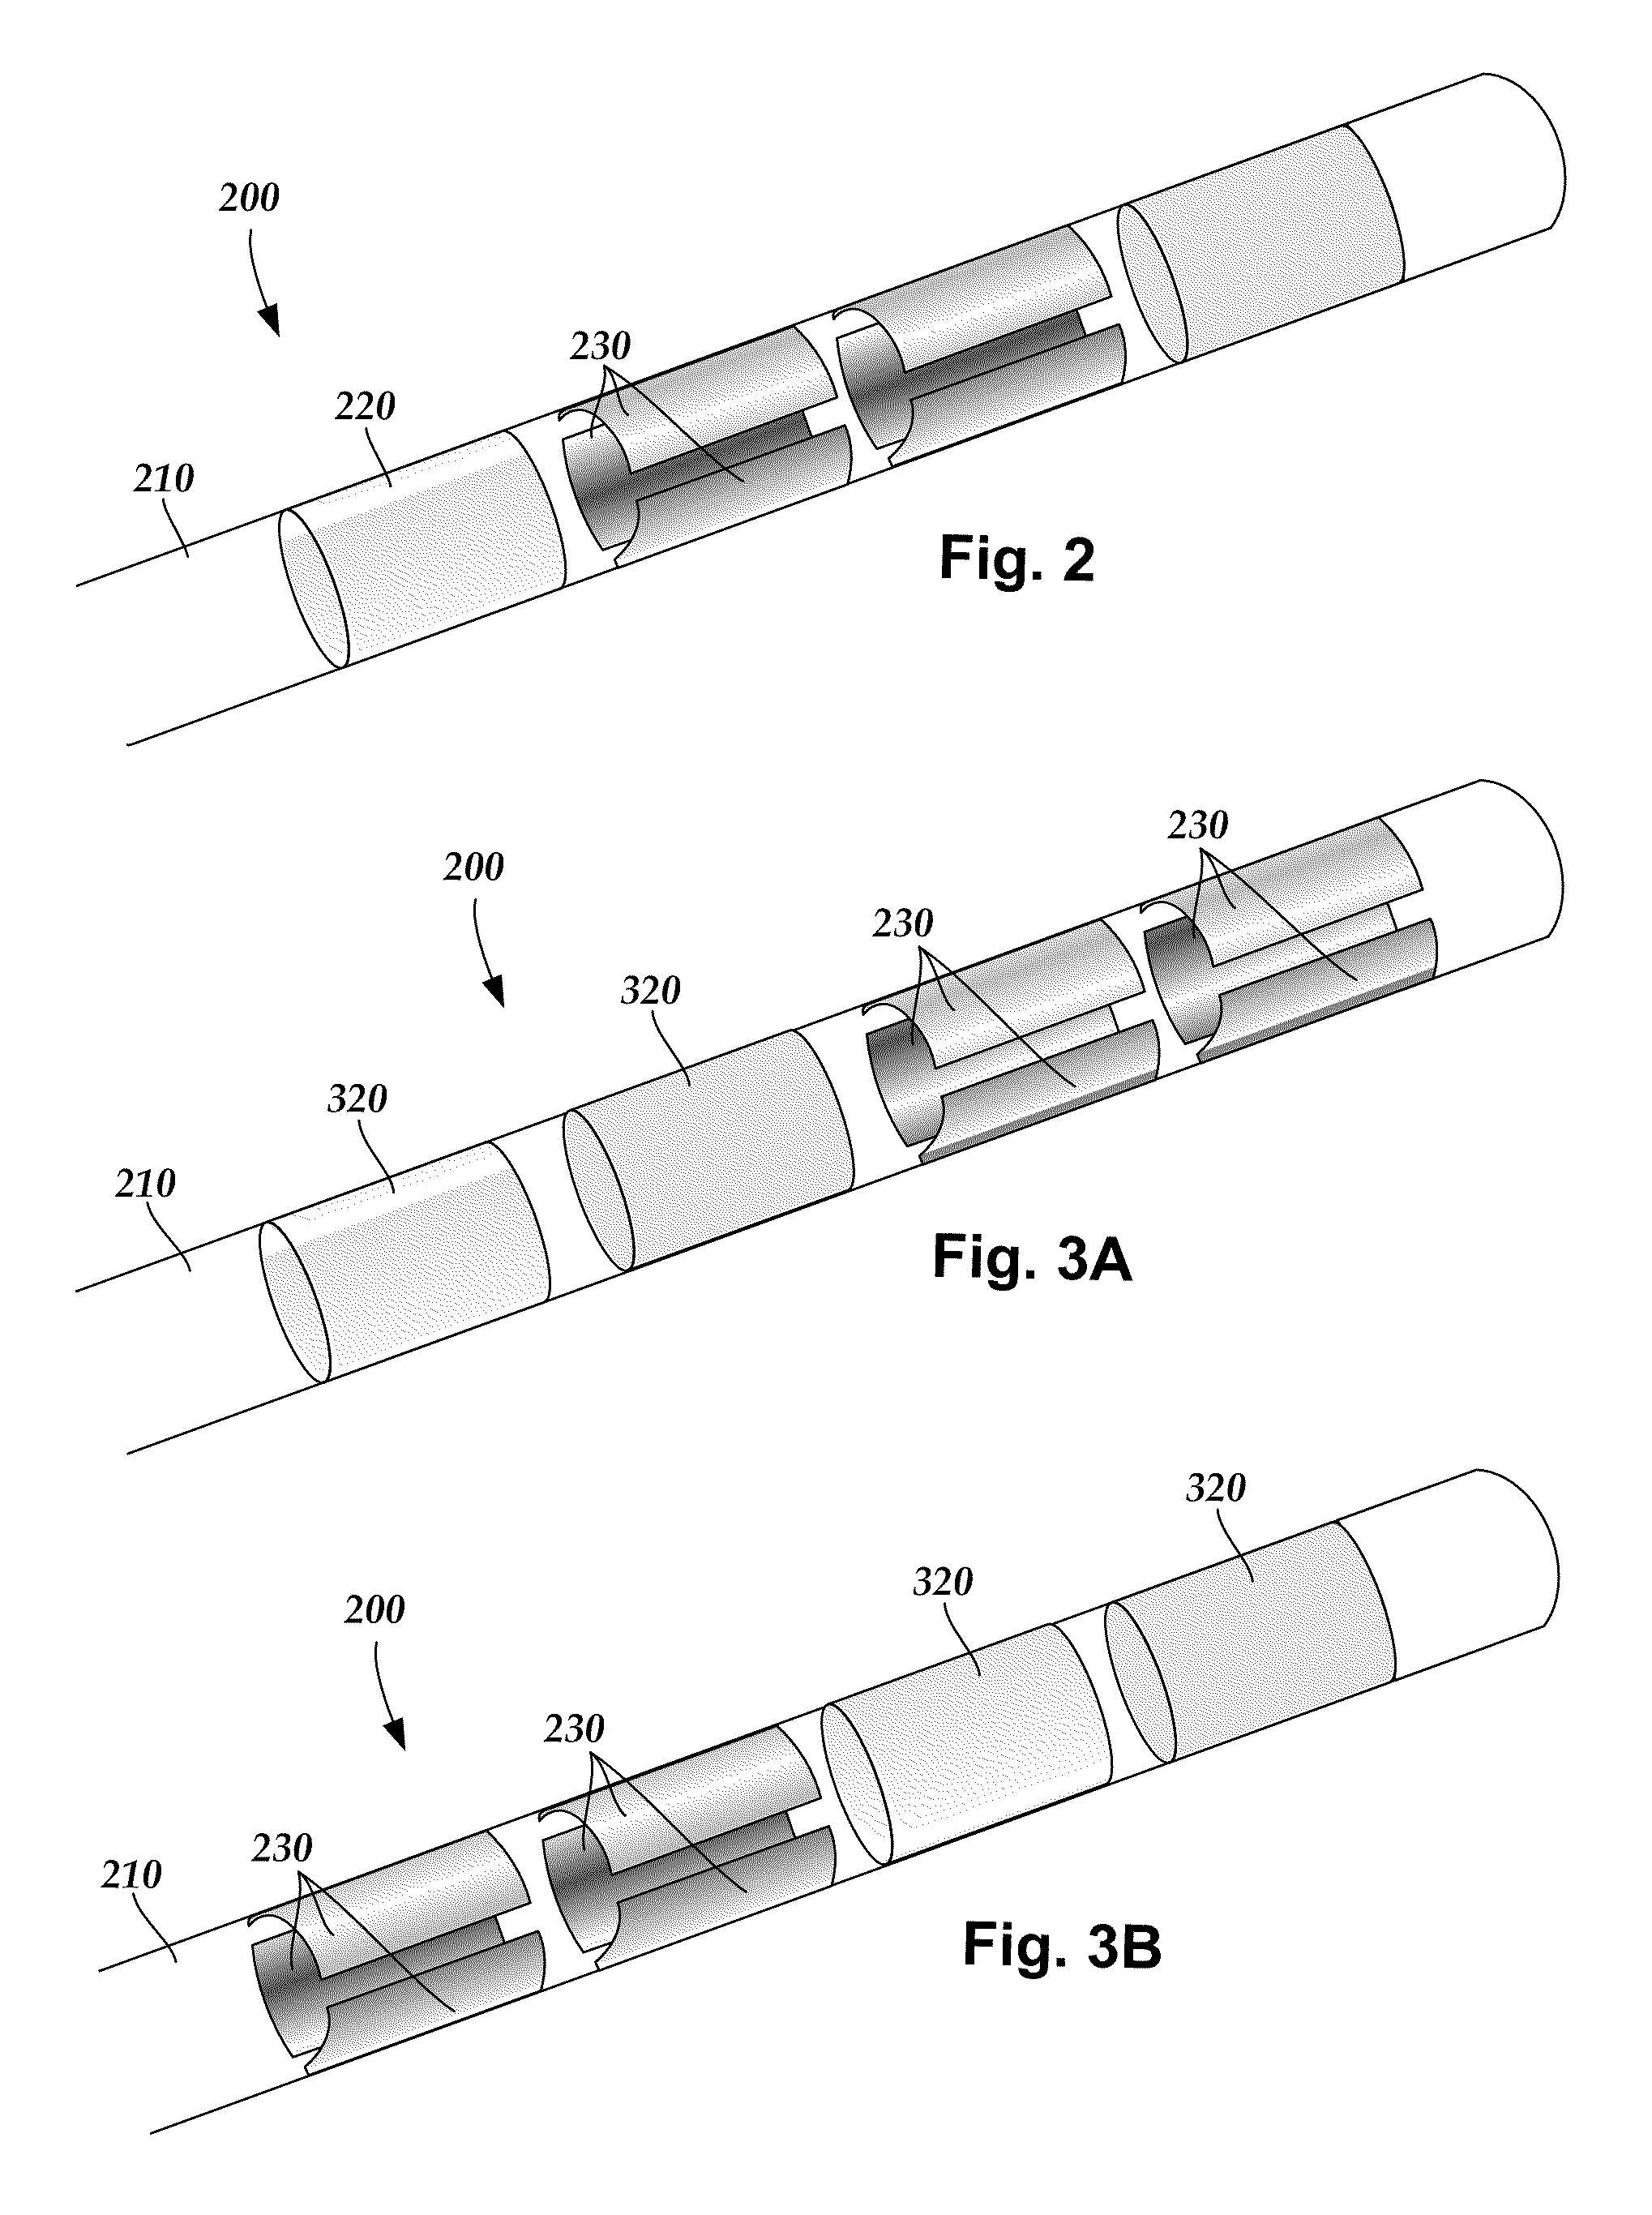 Methods for making leads with radially-aligned segmented electrodes for electrical stimulation systems